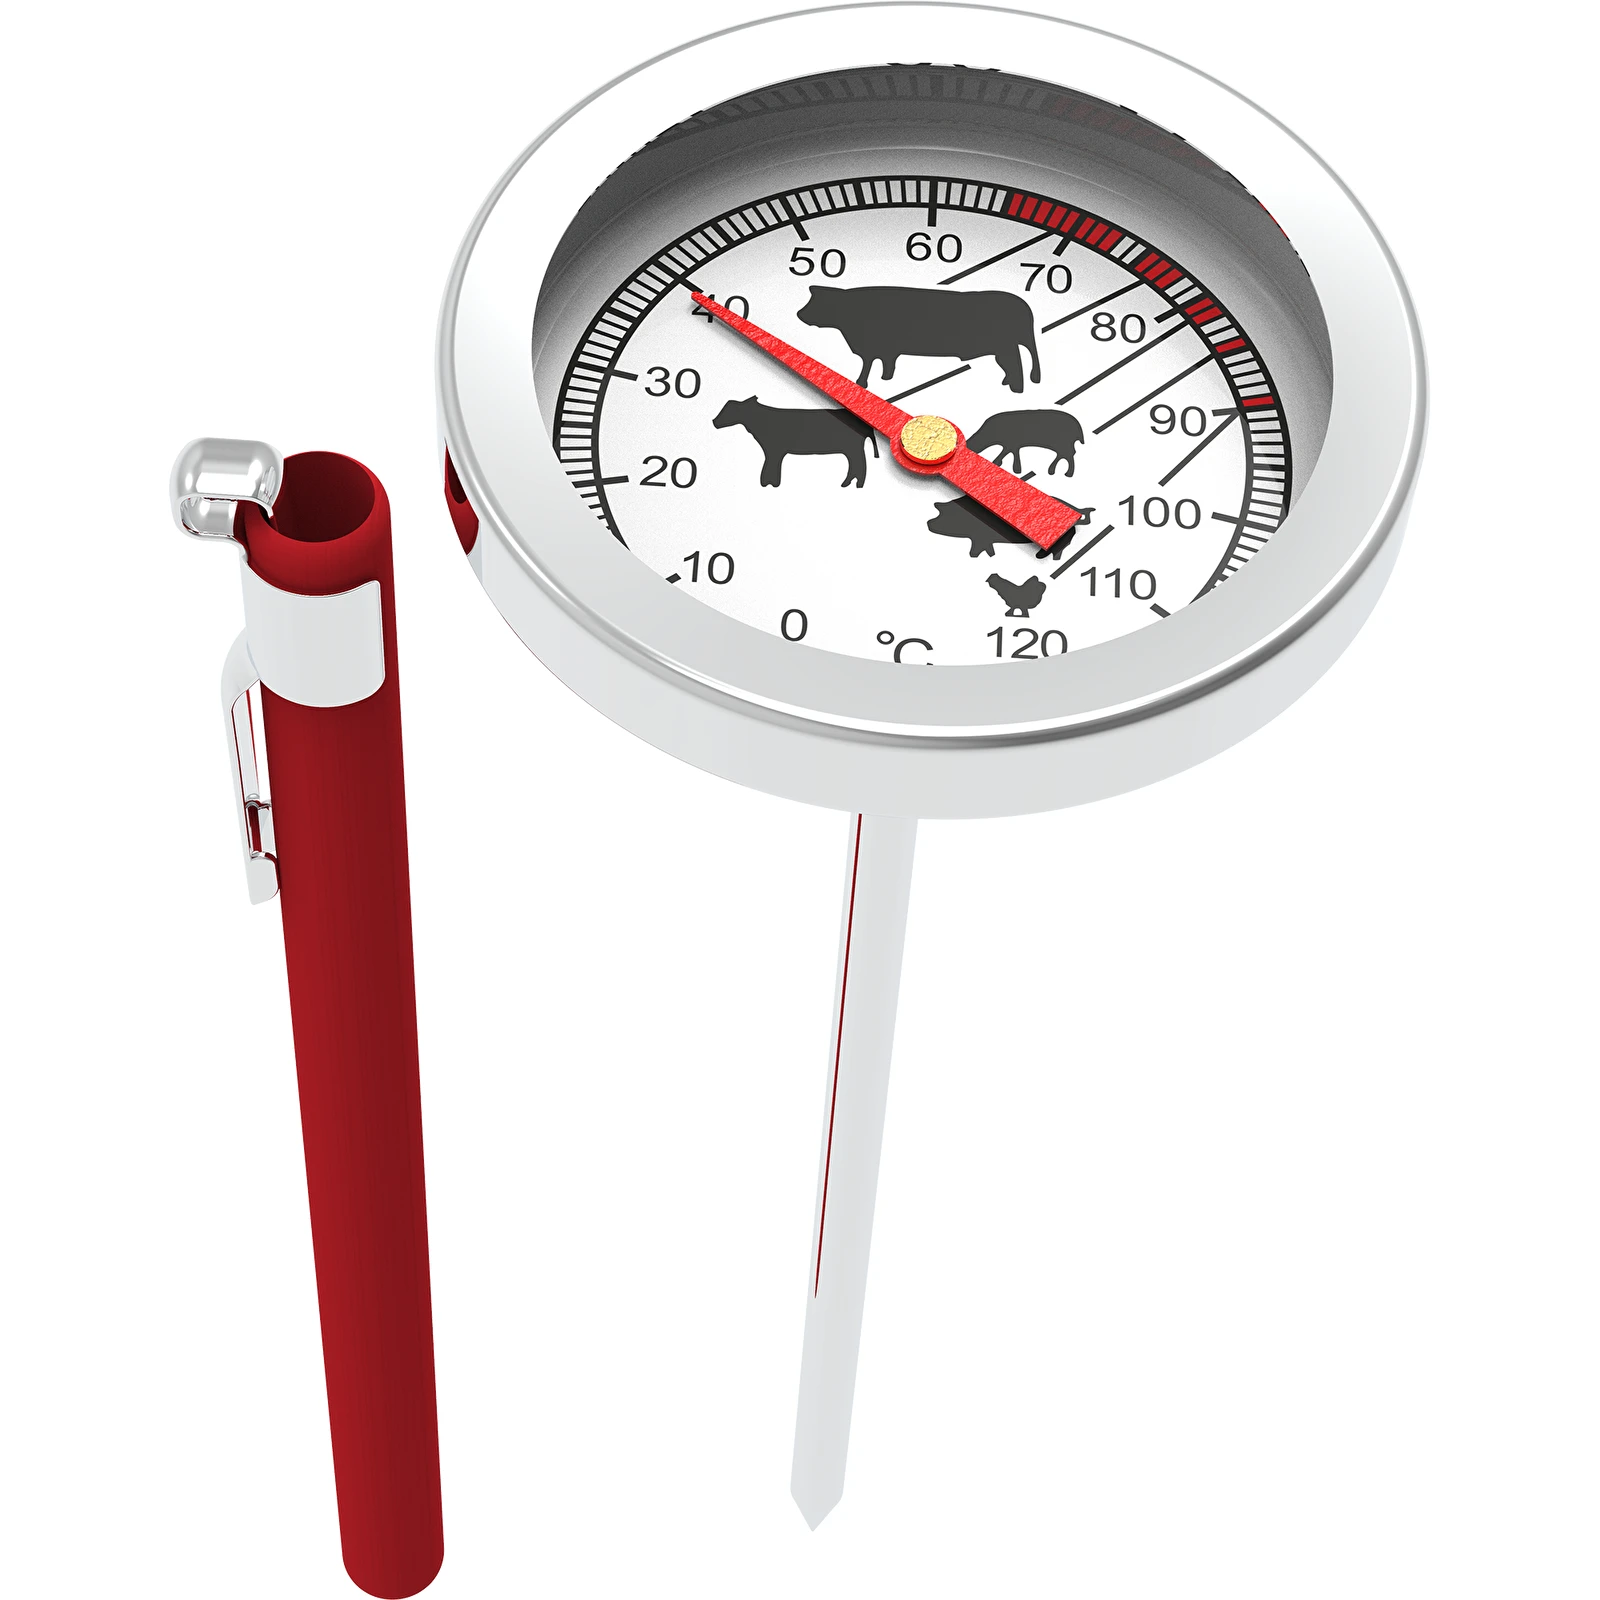 https://browin.com/static/images/1600/meat-roasting-thermometer-0-c-120-c-100600_3.webp